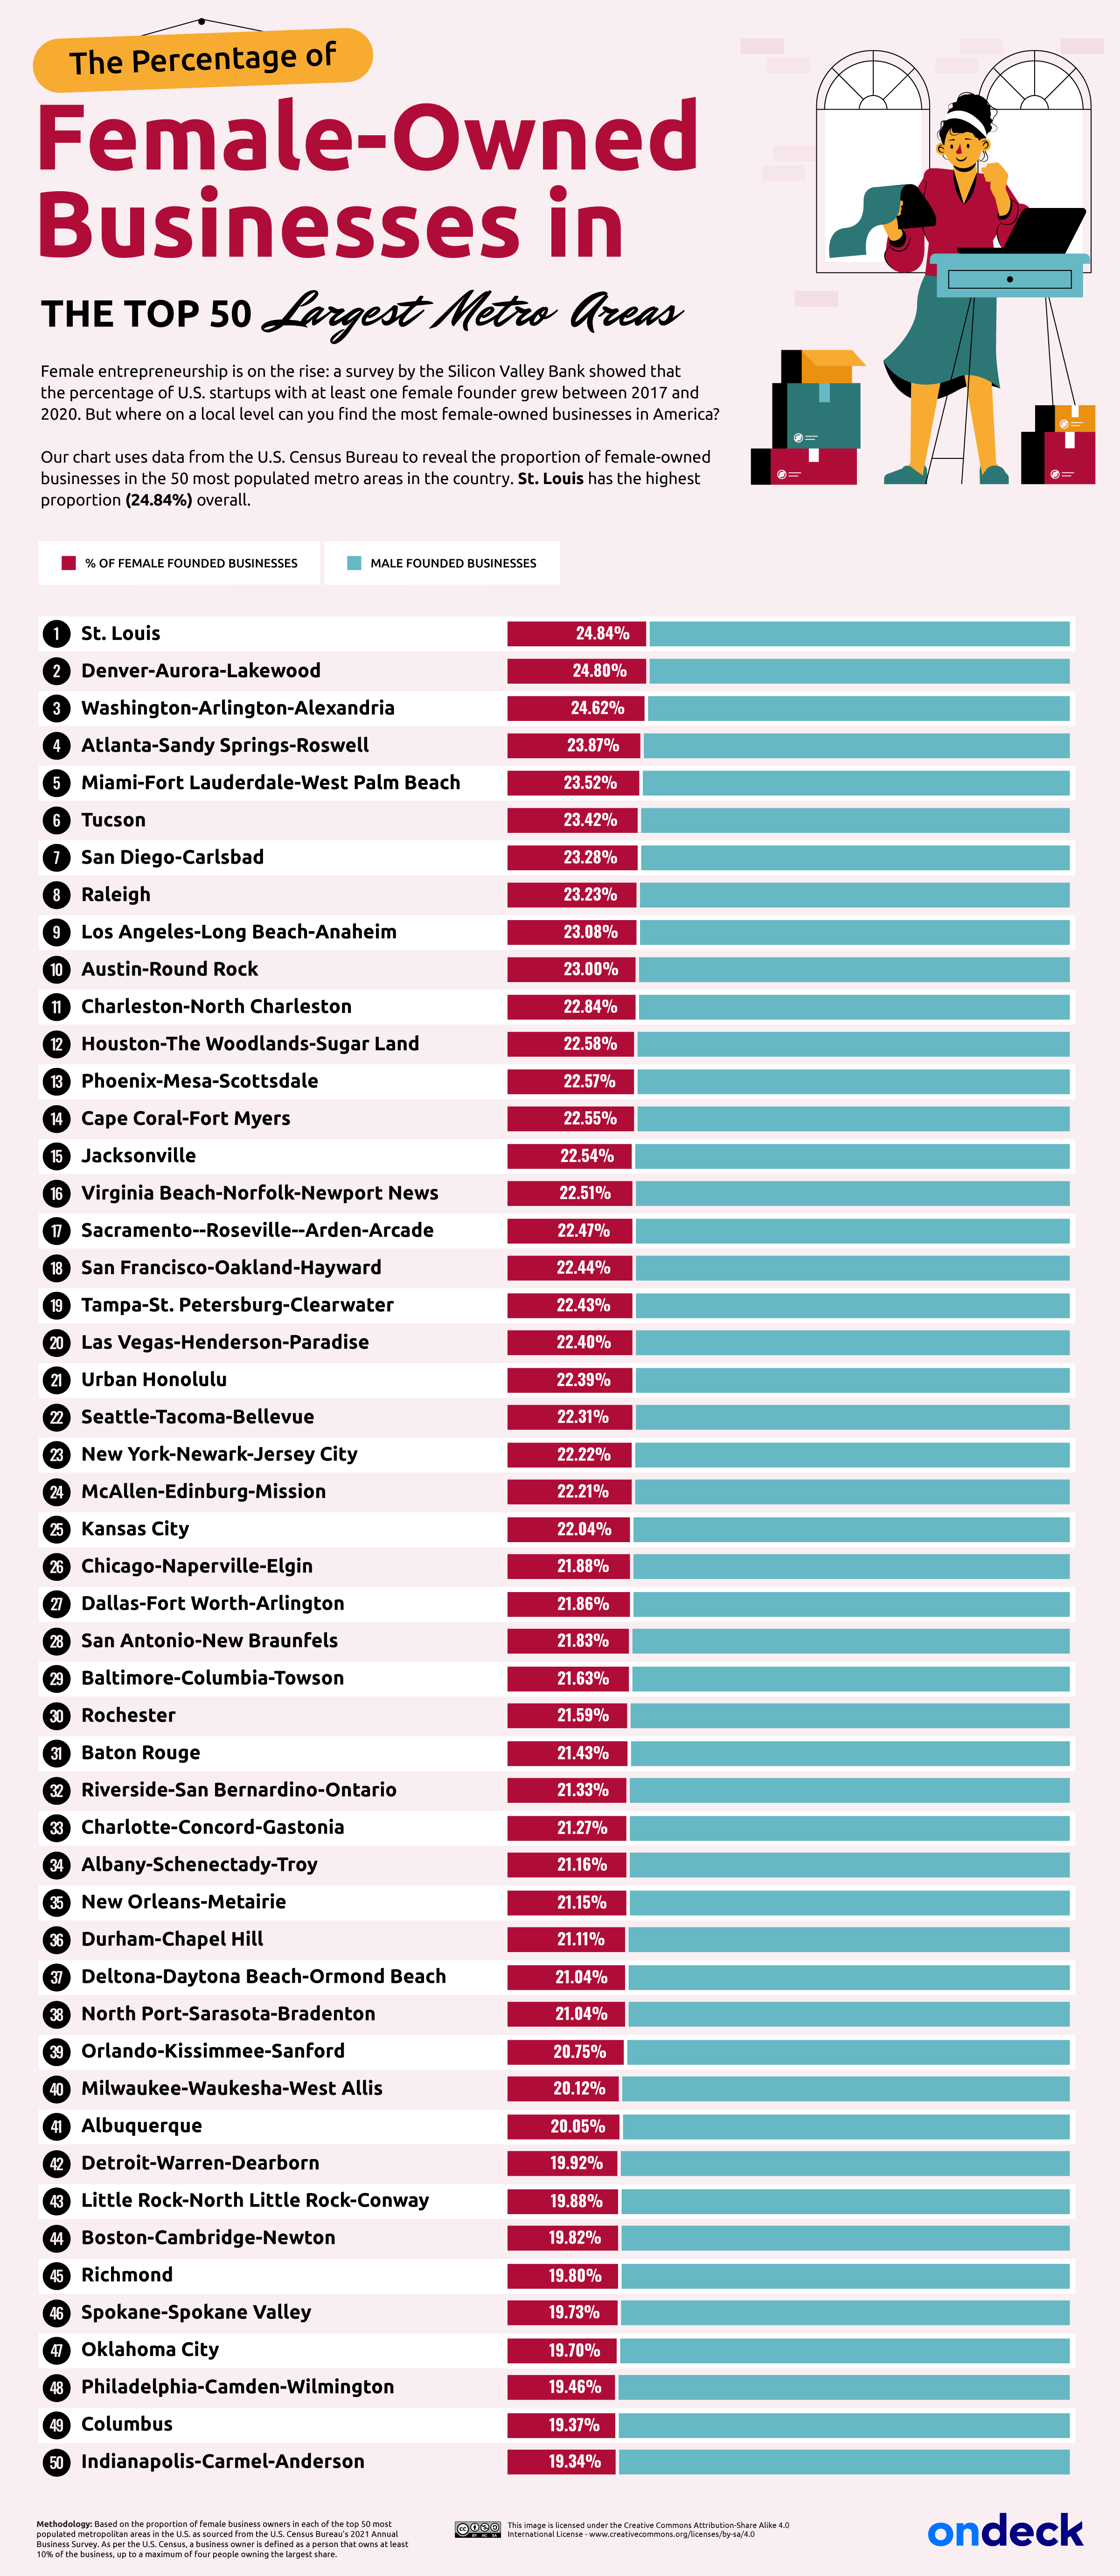 The percentage of female business owners by metro area